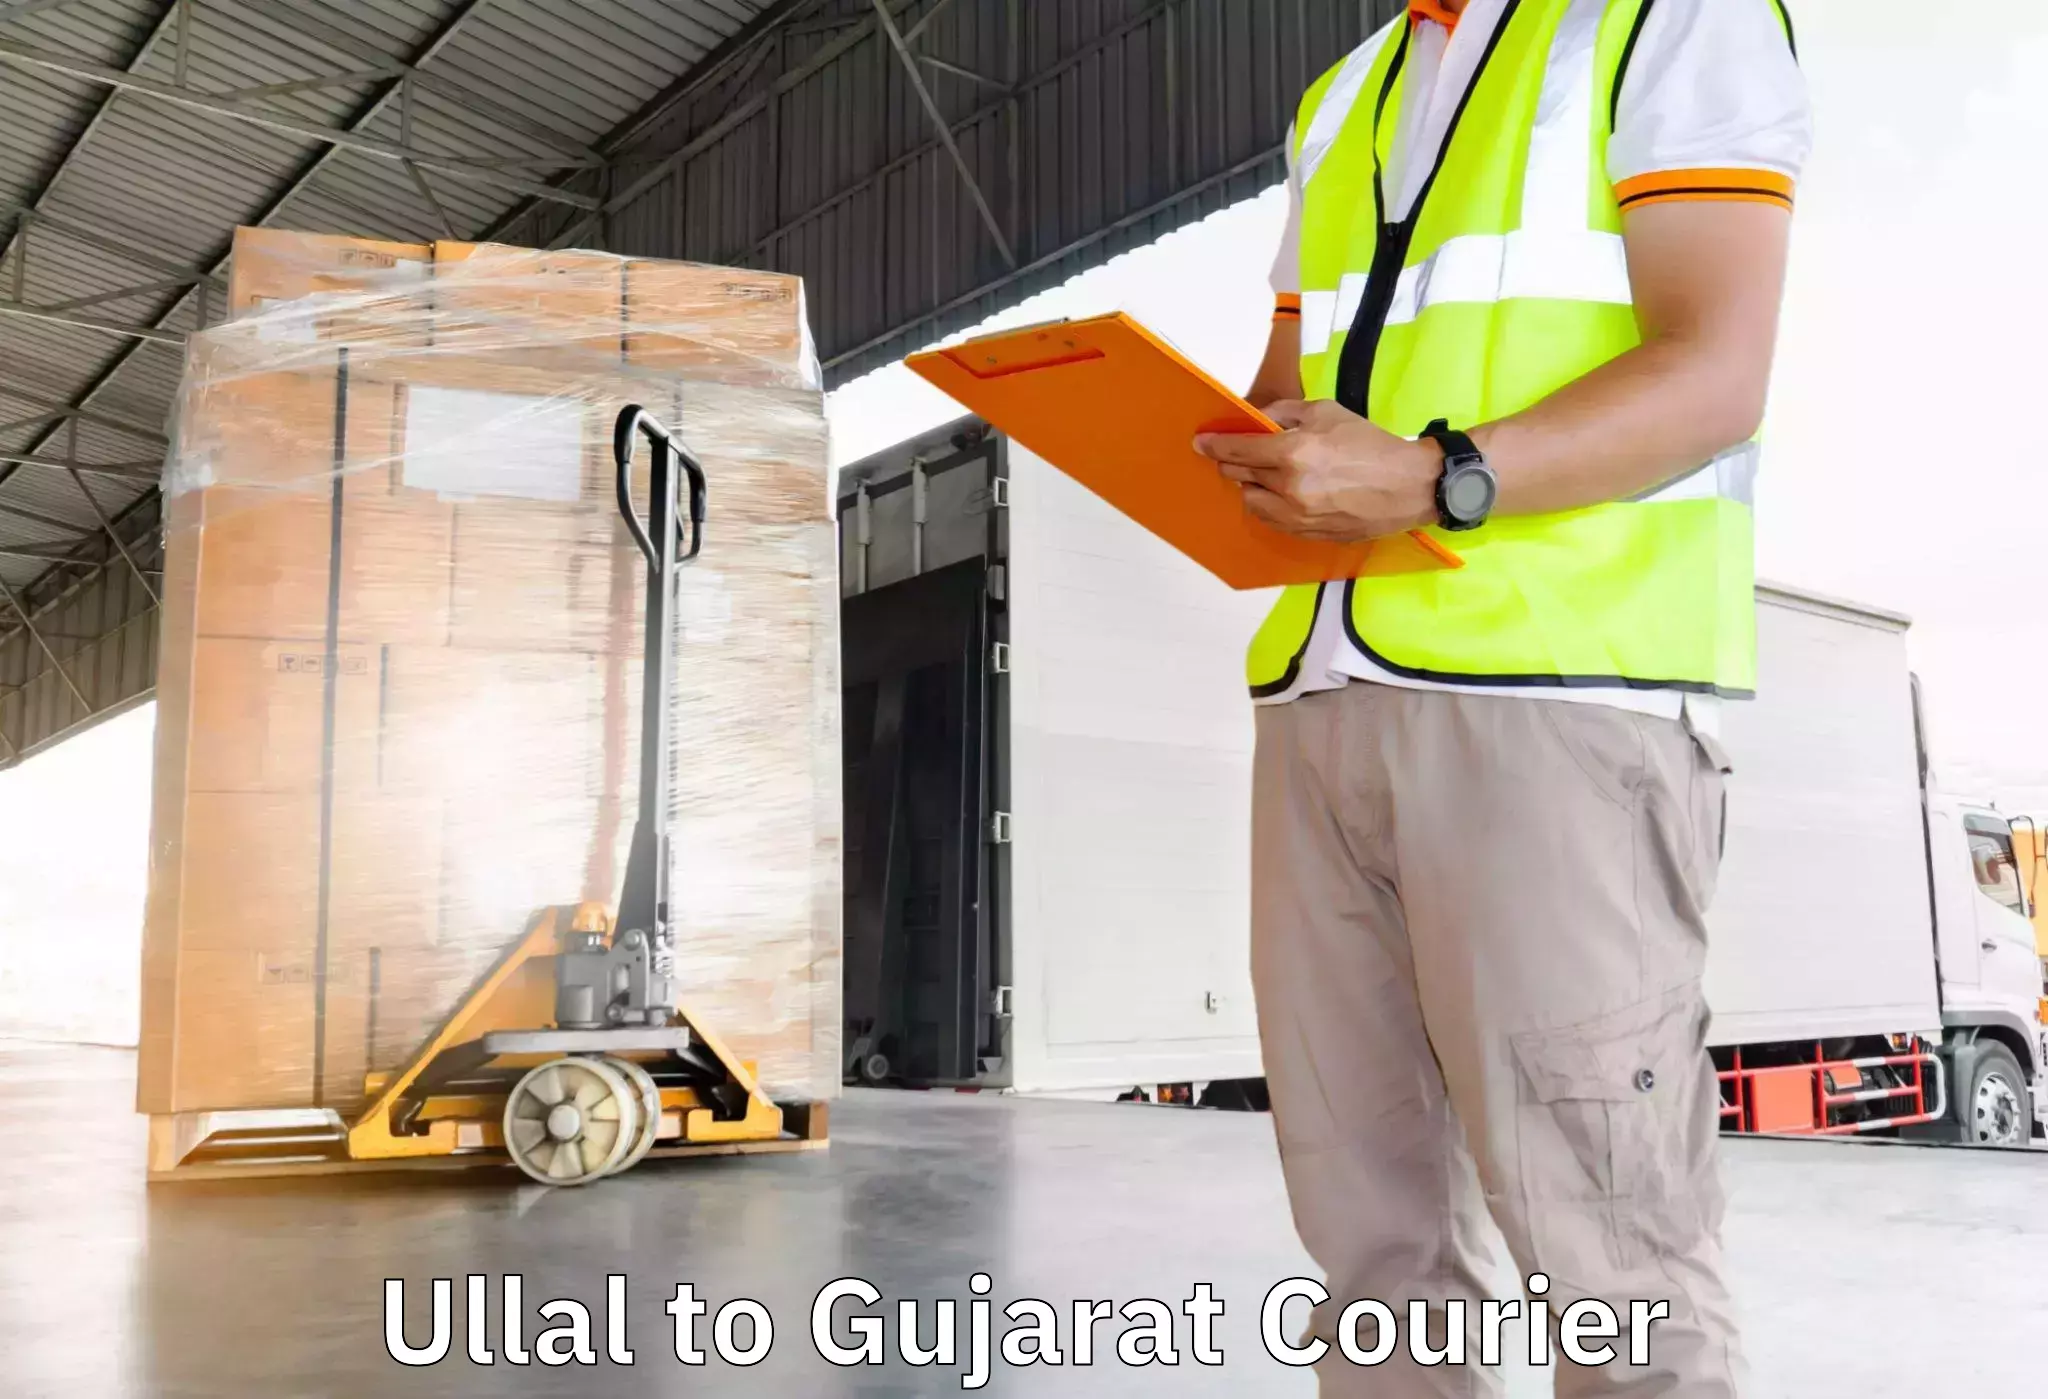 Trusted relocation experts Ullal to Nanpura